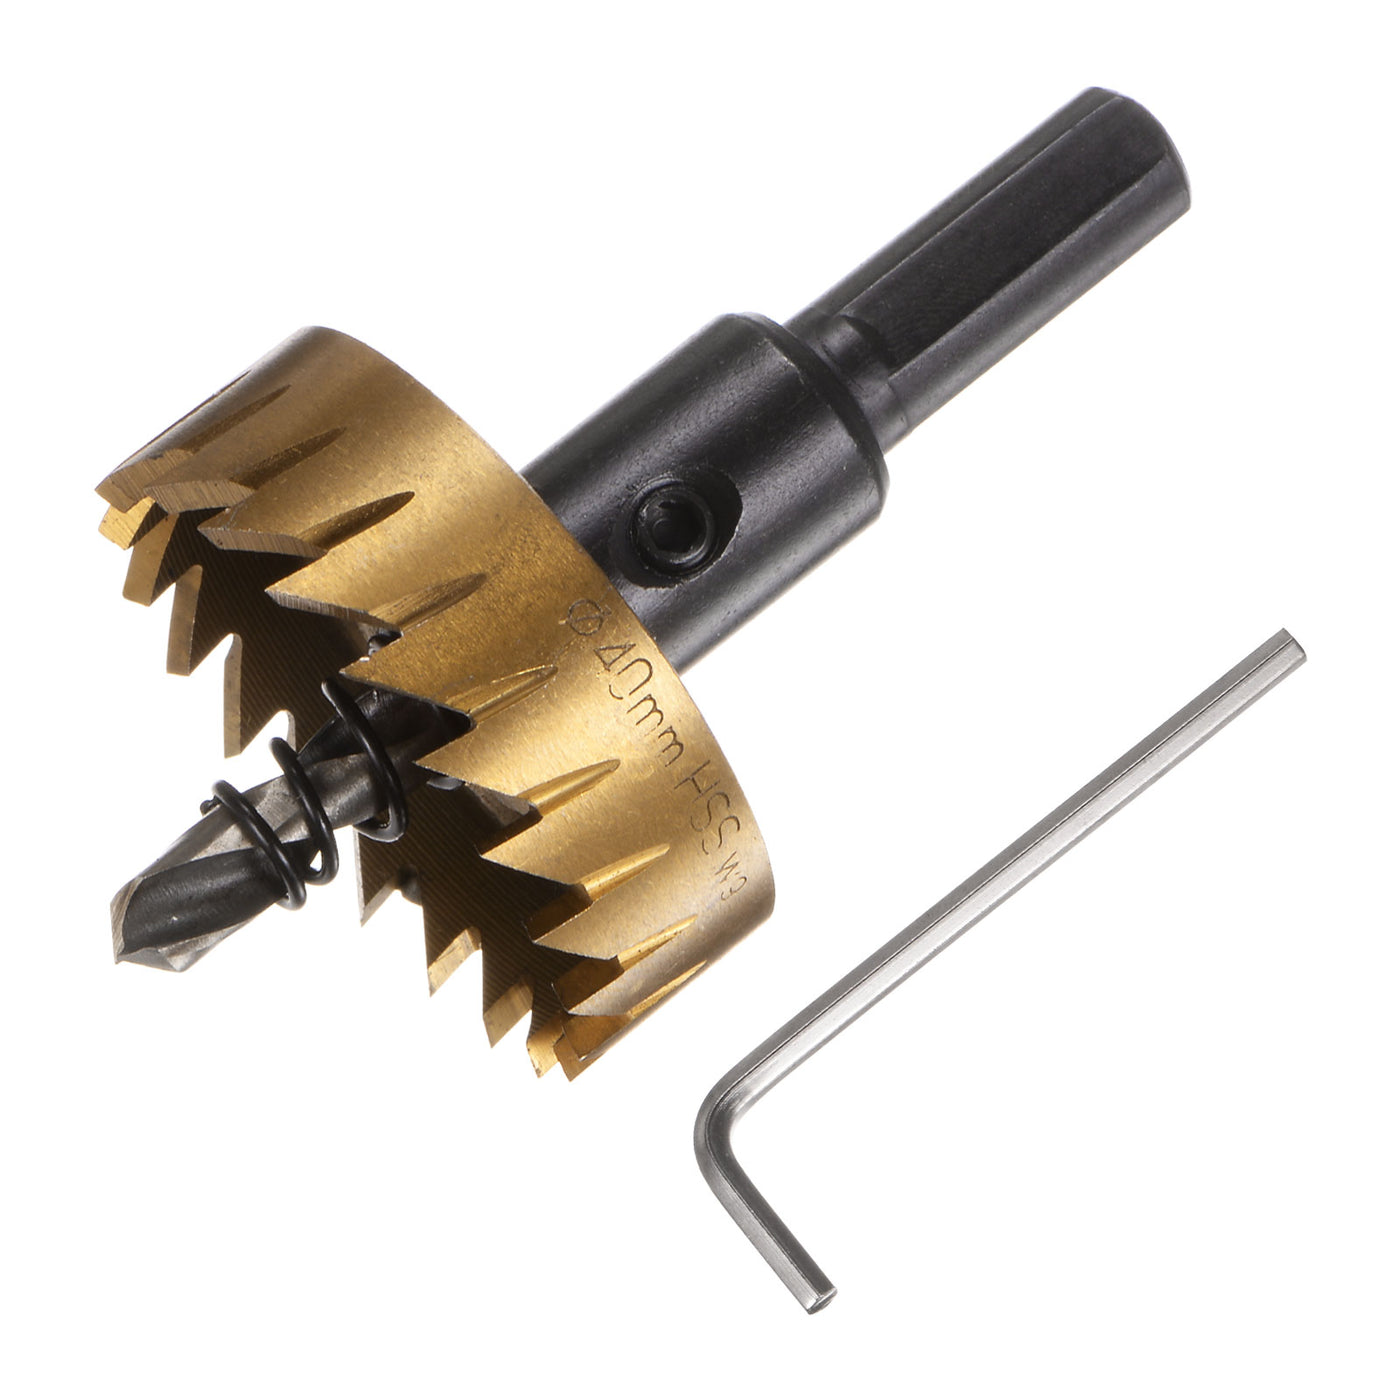 Harfington 40mm M35 HSS (High Speed Steel) Hole Saw Drill Bit for Stainless Steel Alloy